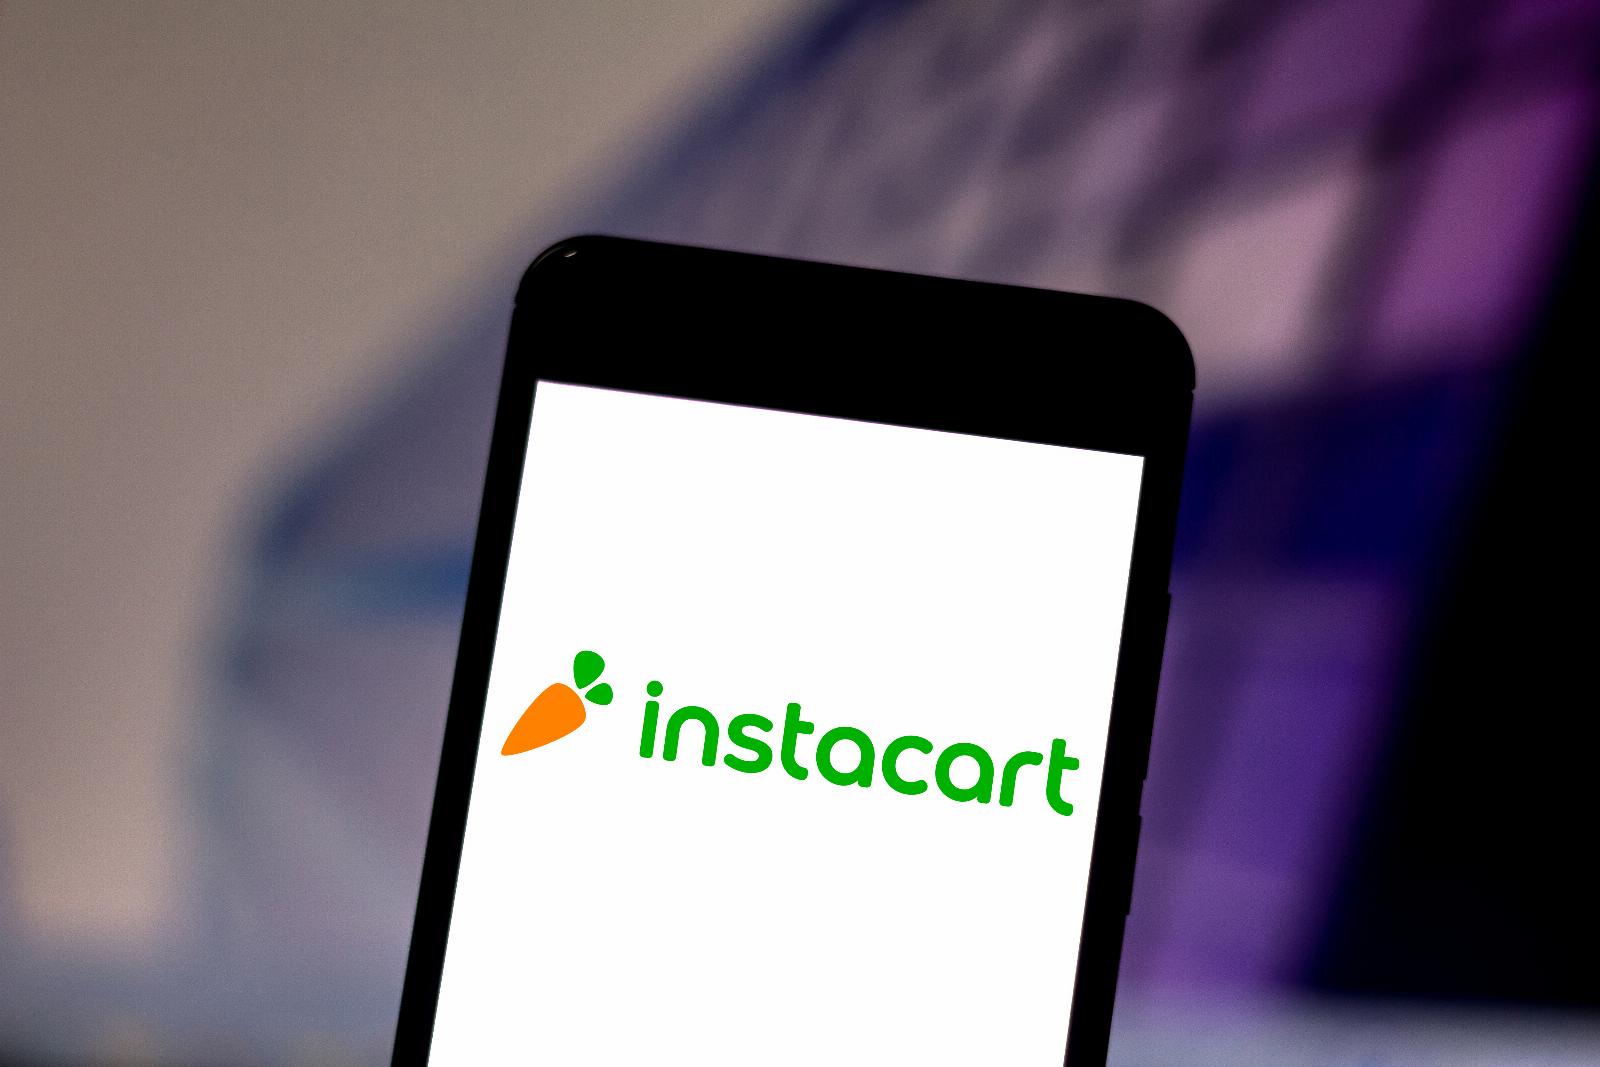 Instacart lays off 250 employees, or 7% of its workforce, to ‘reshape’ company